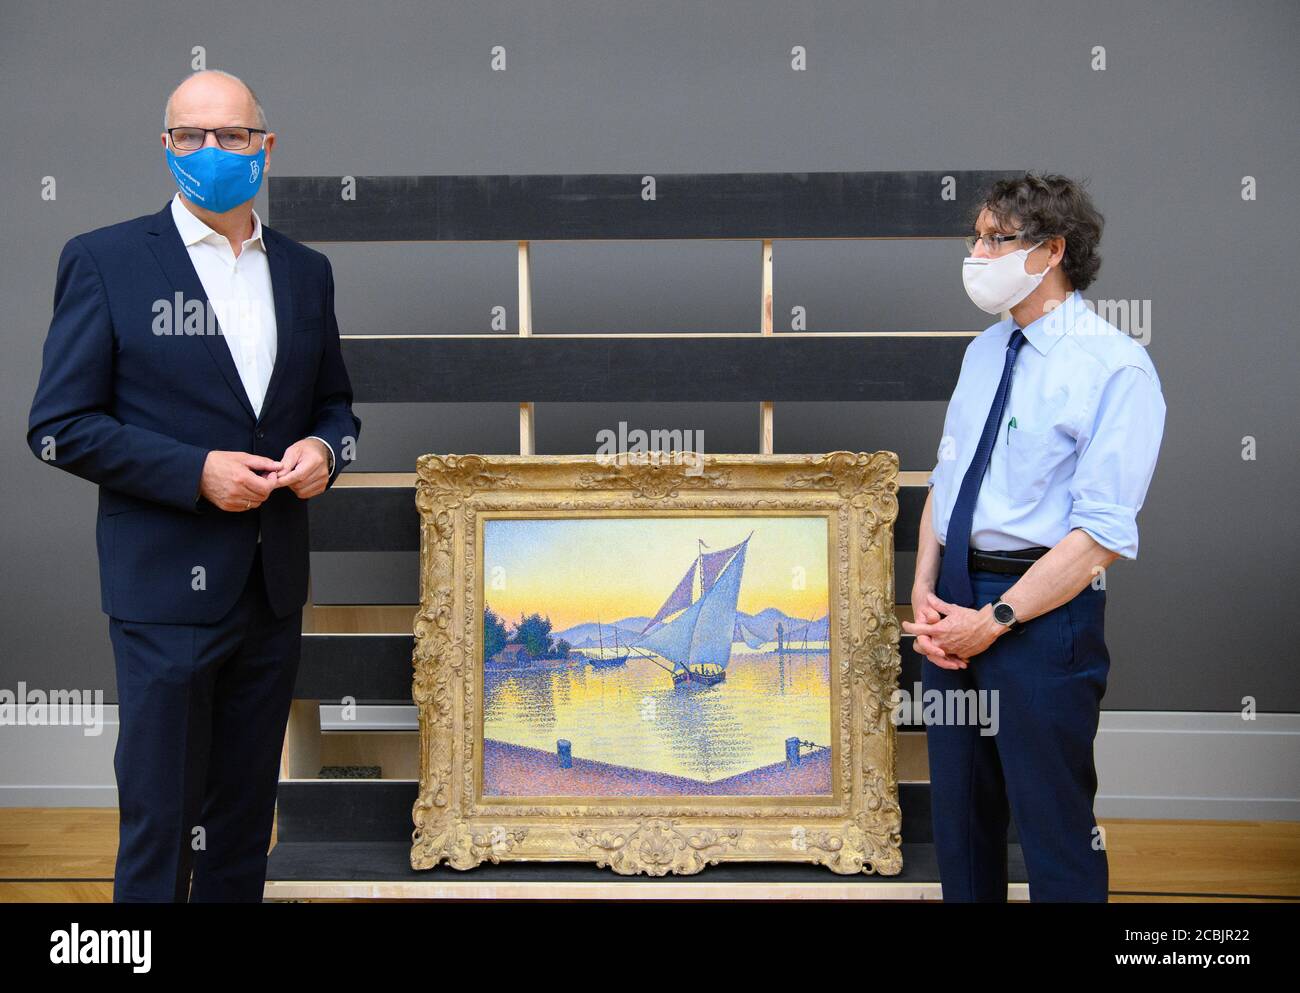 14 August 2020, Brandenburg, Potsdam: Dietmar Woidke (l, SPD), Minister President of Brandenburg, stands next to Chief Curator Michael Philipp during his press tour at the Barberini Museum. Between them stands the painting "The Harbor at Sunset, Opus 236 (Saint-Tropez 1892)" by Paul Signac. During the closing phase of the museum, there was a view of the new exhibition "Impressionism. The Hasso Plattner Collection", which will open on 07.09.2020. Potsdam is thus to become one of the most important centres of collections of Impressionist landscape painting worldwide outside of Paris. Photo: Soer Stock Photo